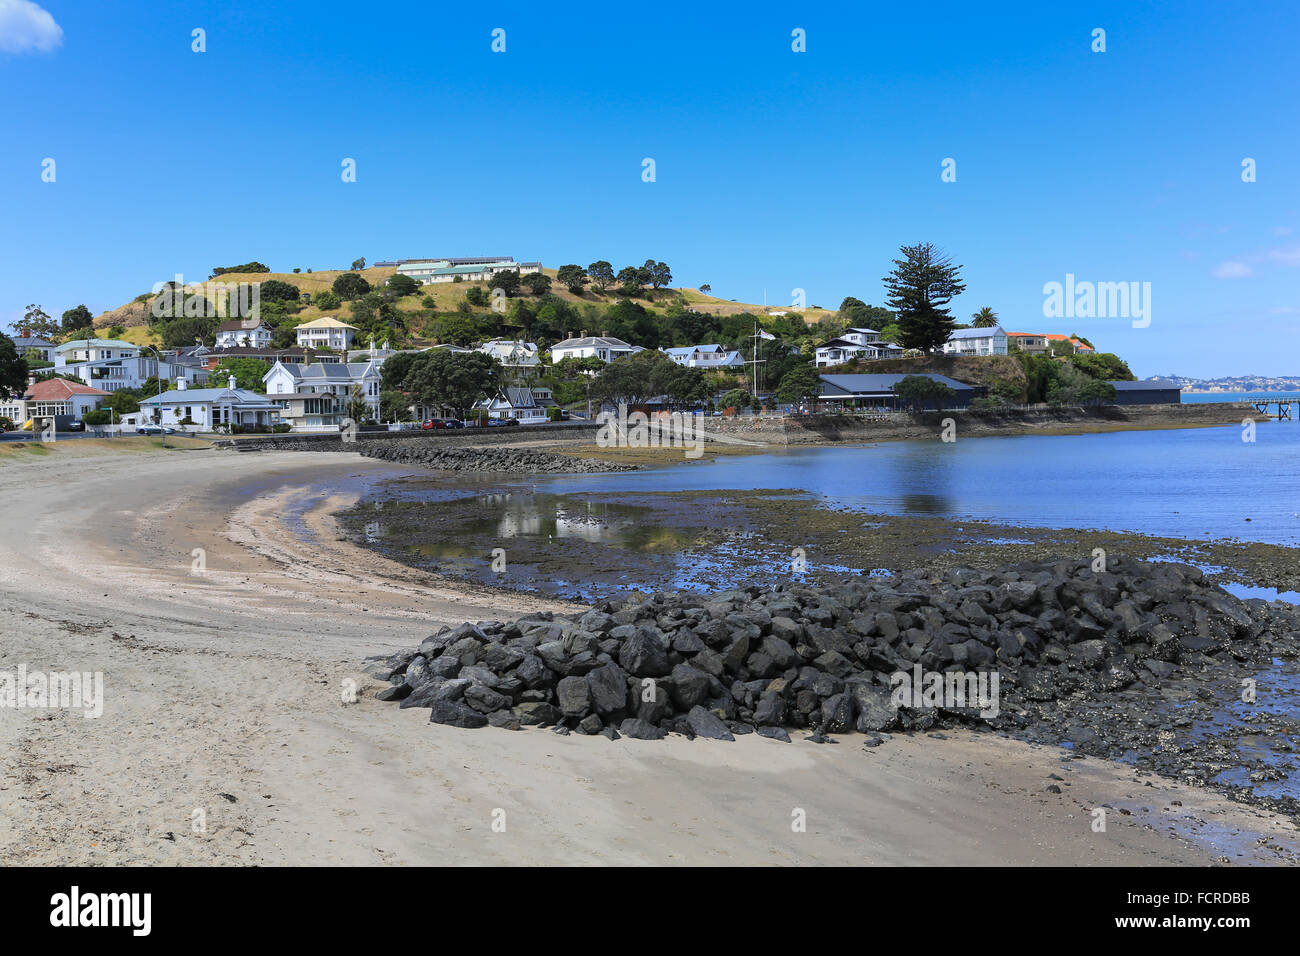 Rock groynes help to stabilize the beach on Torpedo Bay at Devonport, Auckland, New Zealand. Stock Photo